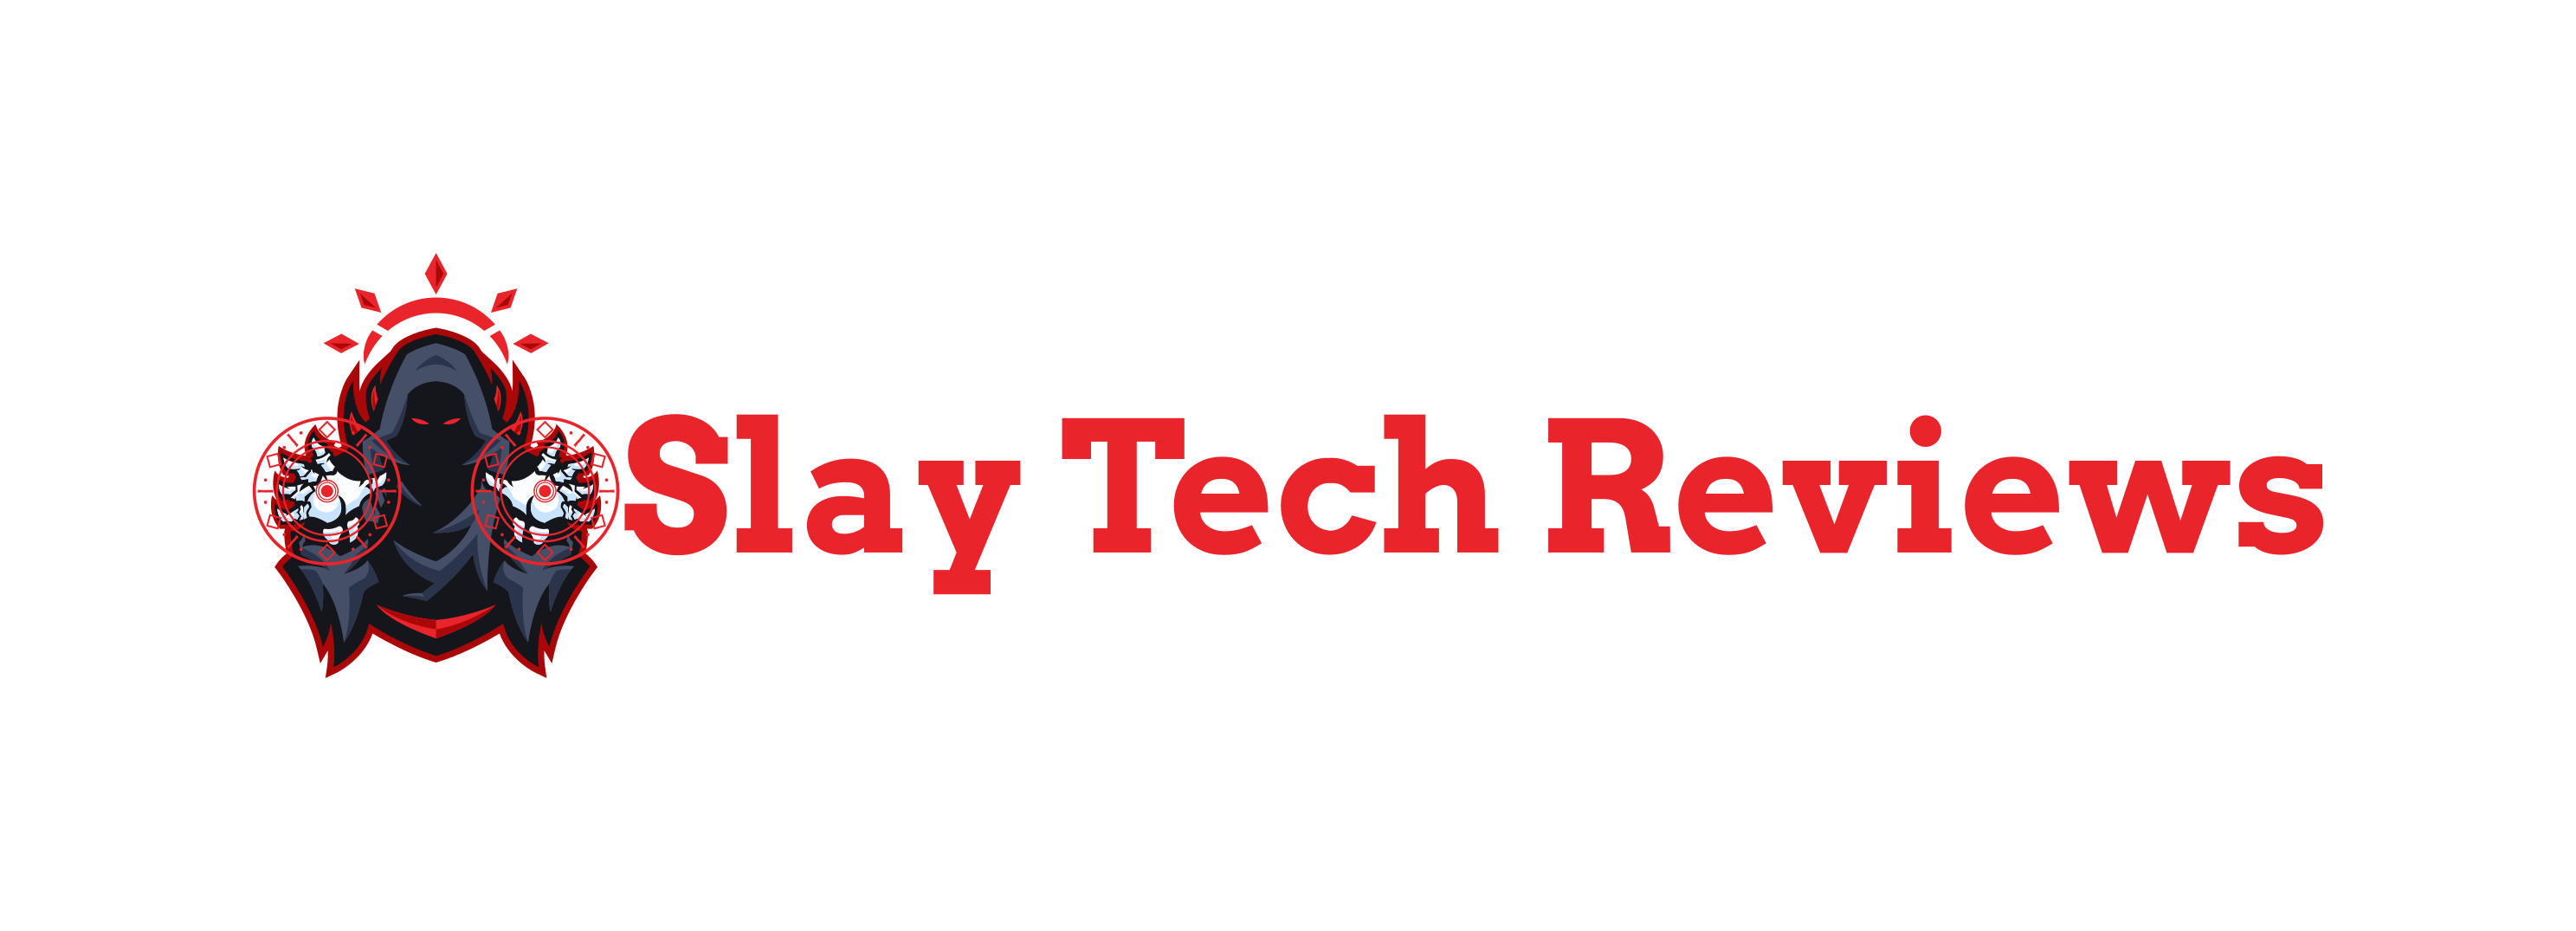 Slay tech logo where we slay the web with our reviews